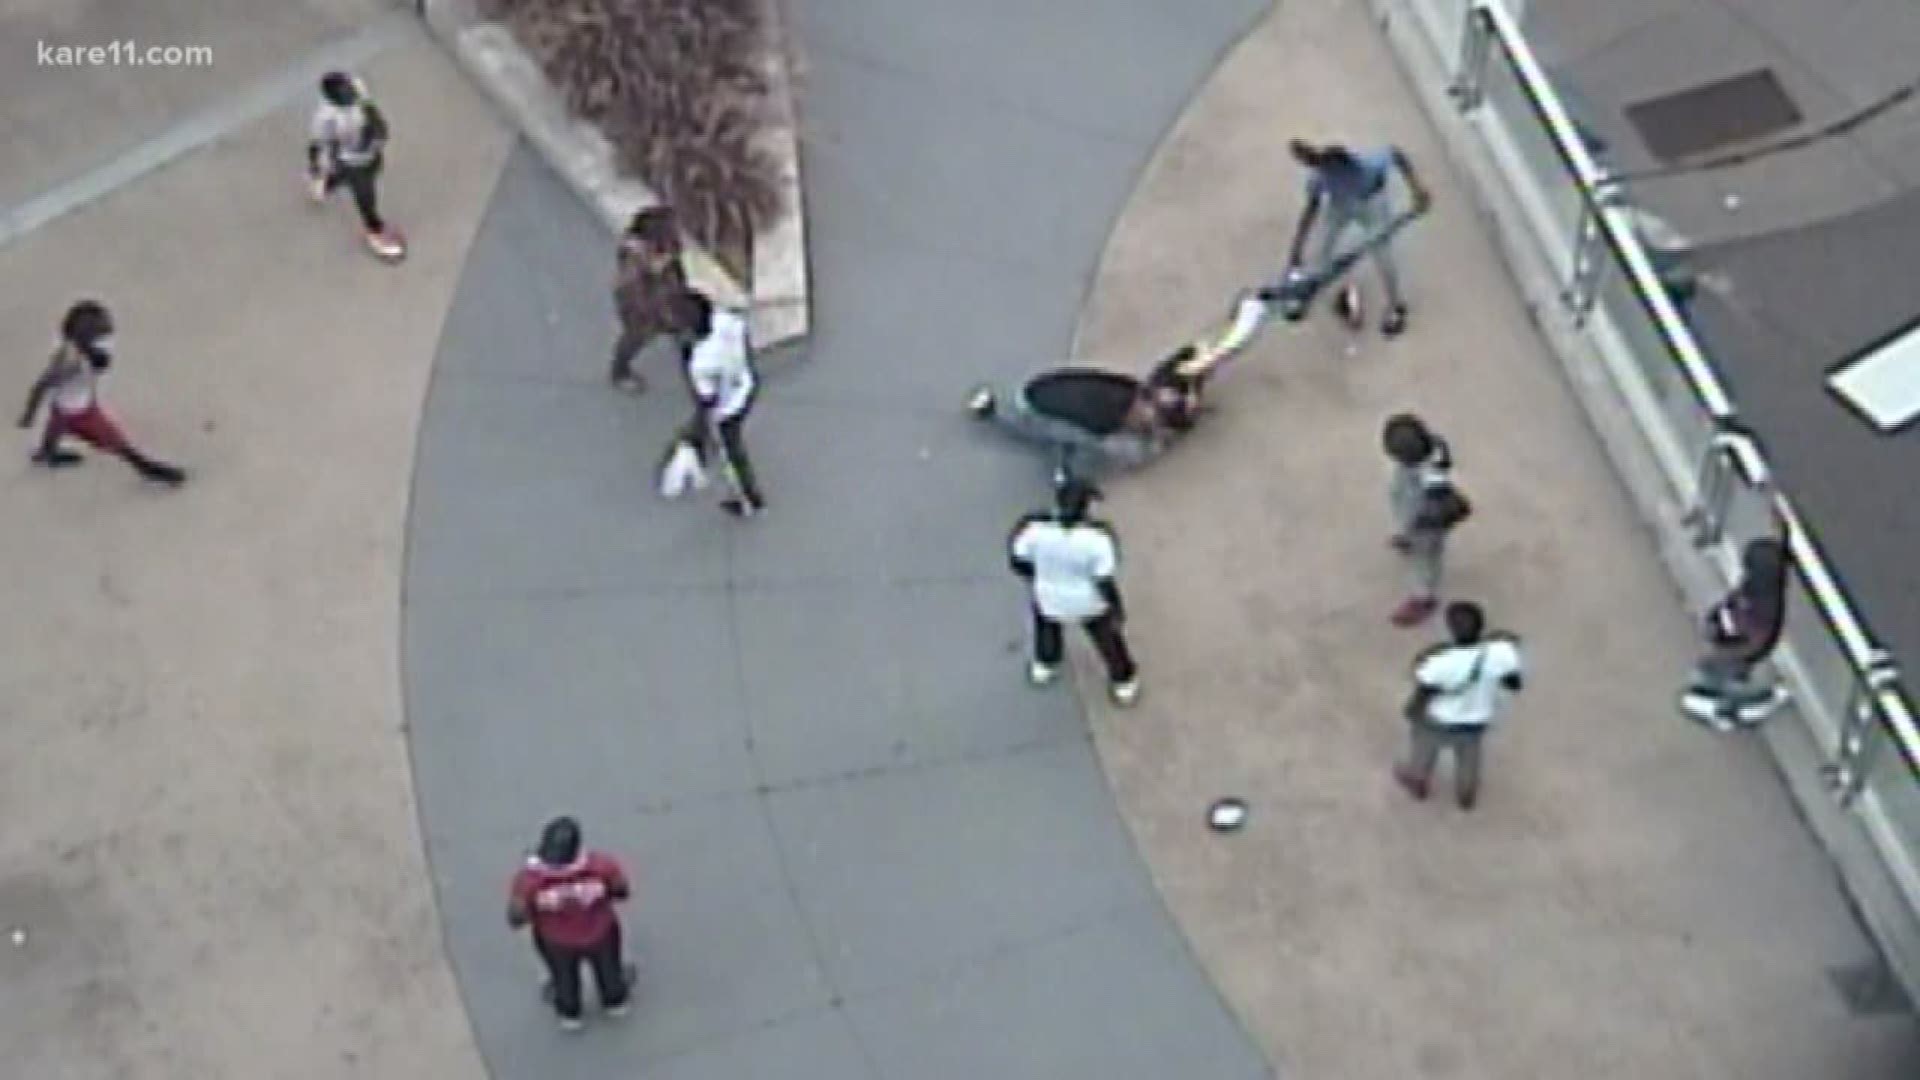 Viewers react to video of two incidents, showing victims being viciously beaten by a group of men.